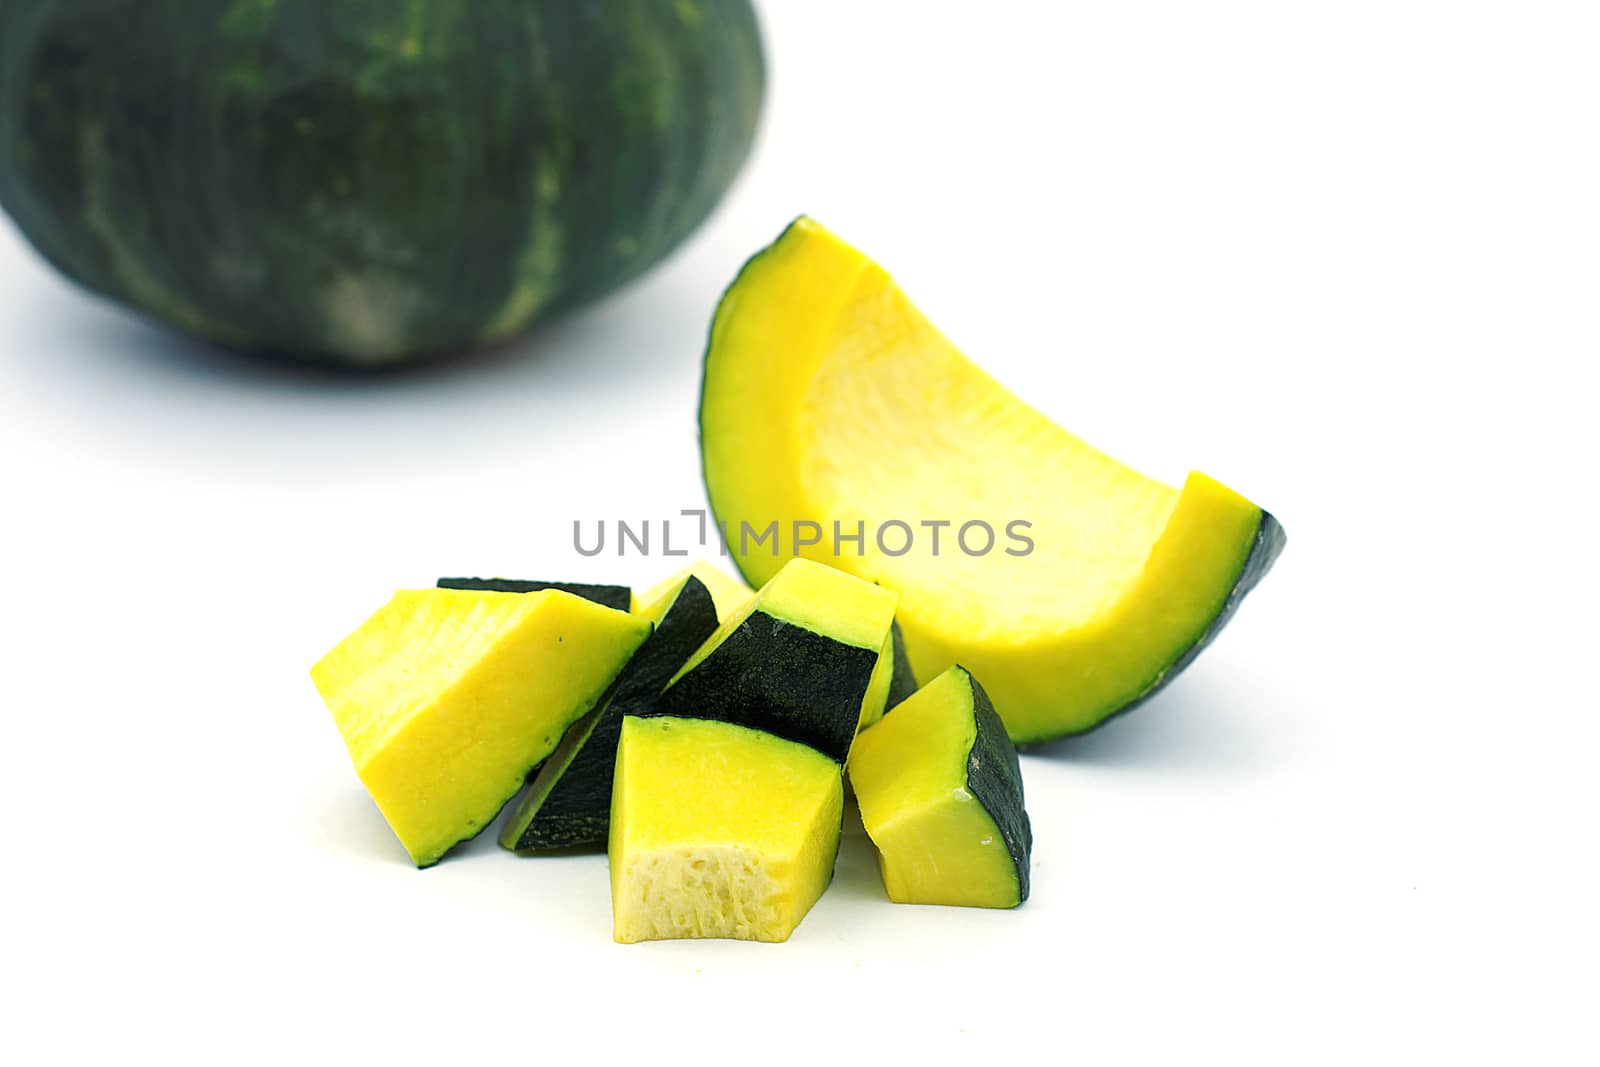 Sliced raw yellow pumpkin on white background. Sliced yellow pumpkin and green pumpkin for use as cooking ingredients